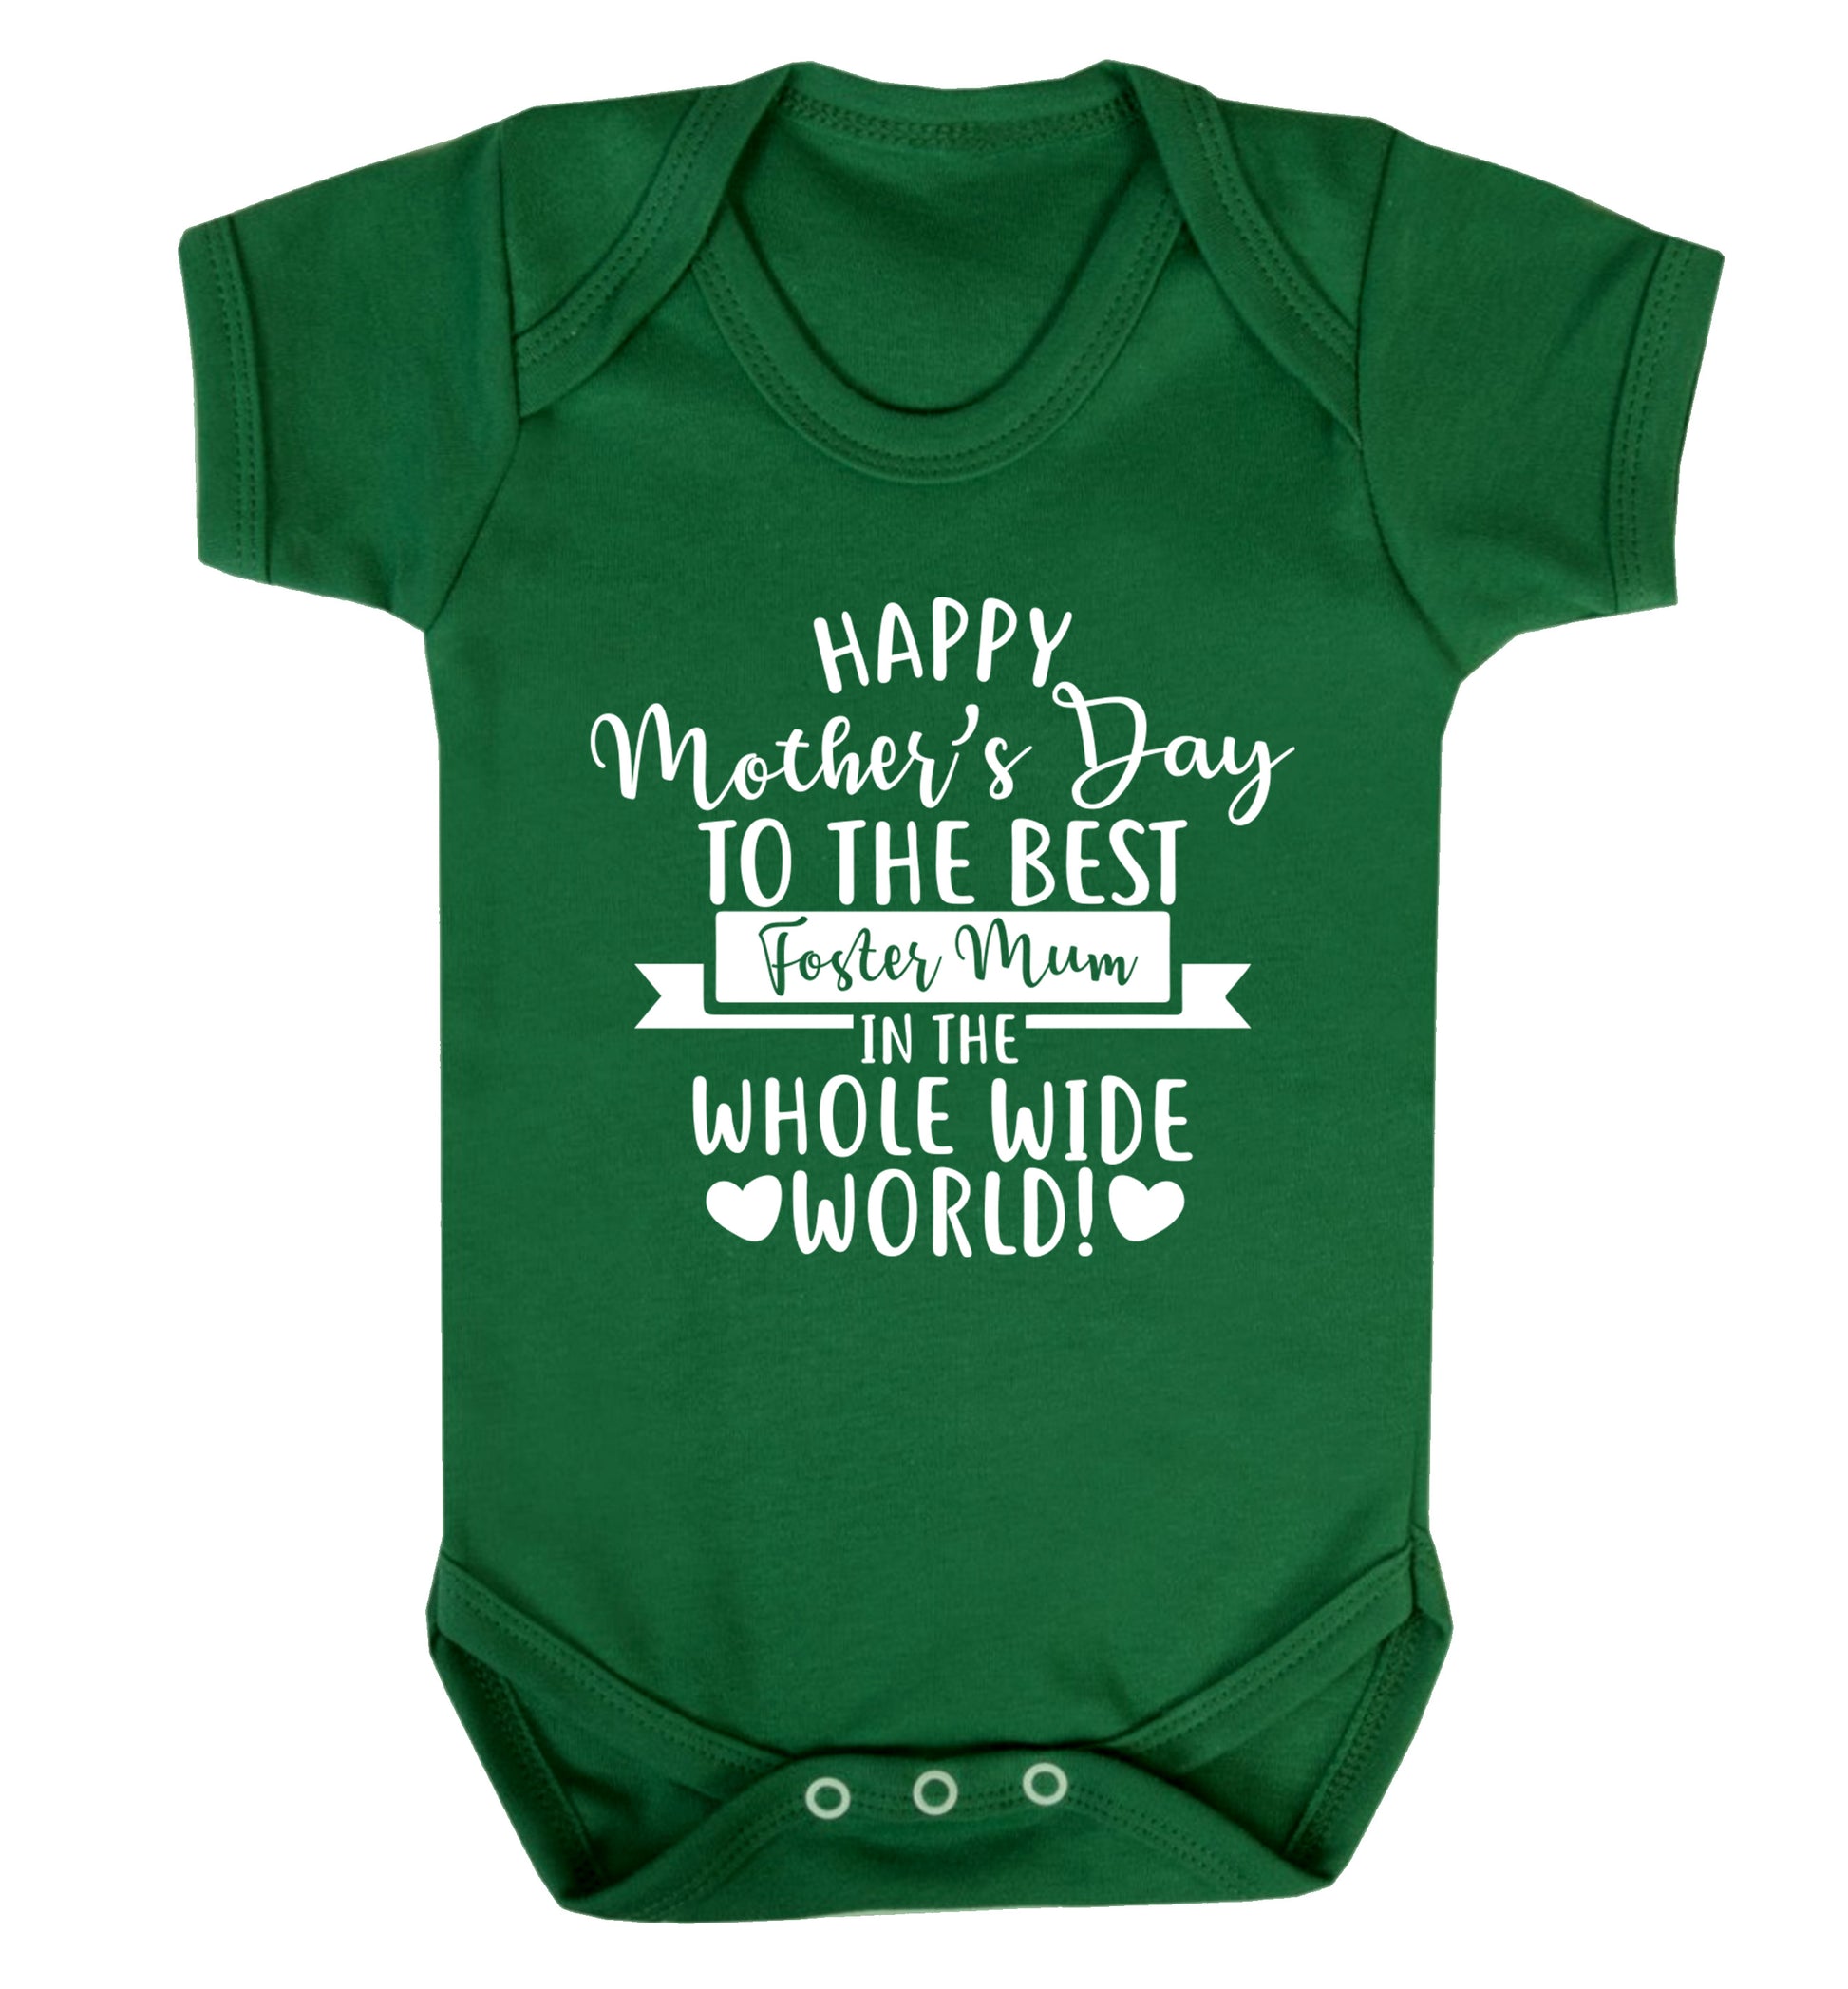 Happy mother's day to the best foster mum in the world Baby Vest green 18-24 months